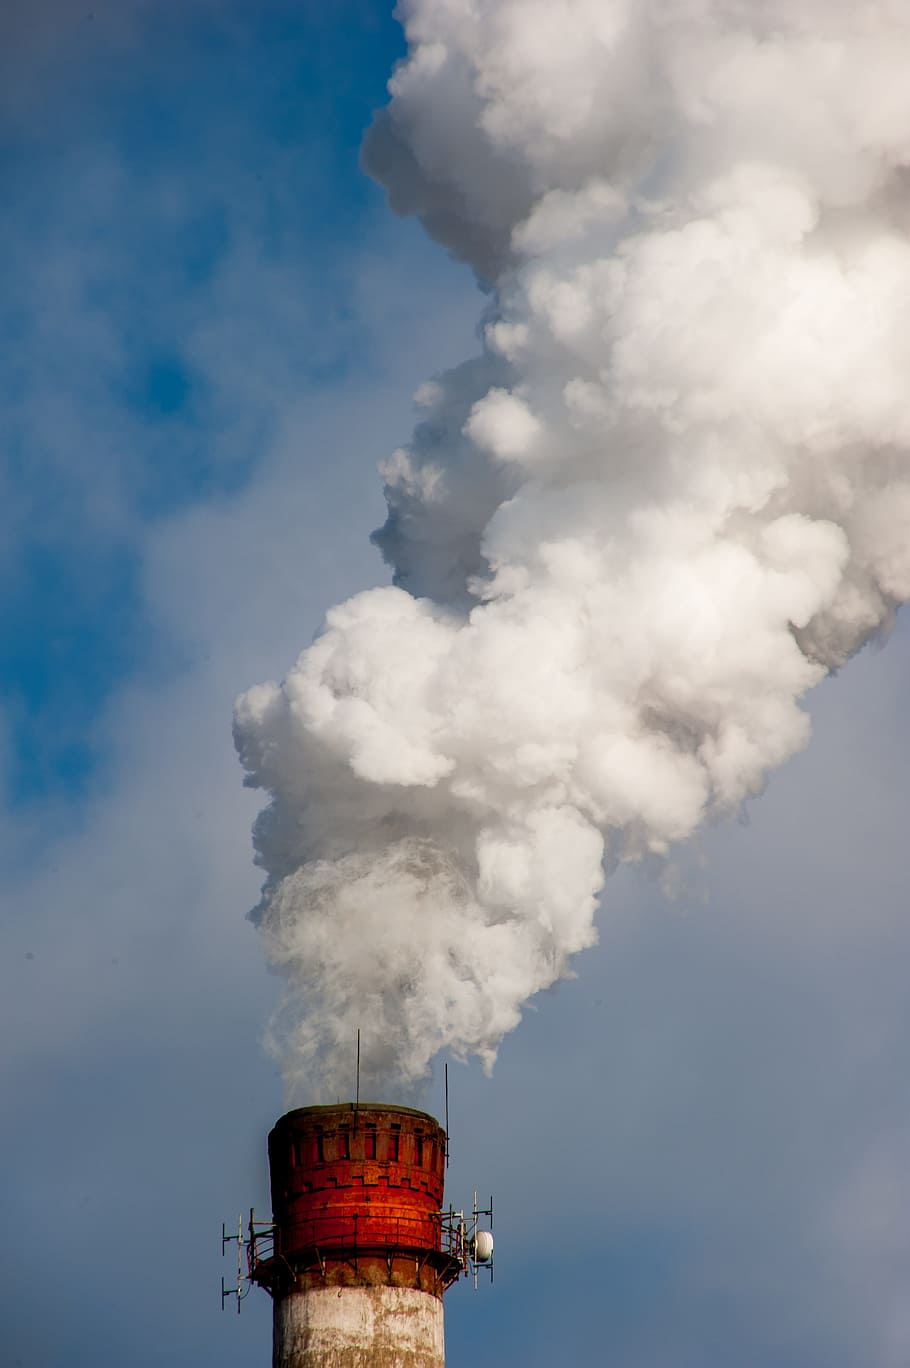 smoke, pollution, pairs, no one, smog, air pollution, sky, outdoors, industry, environment